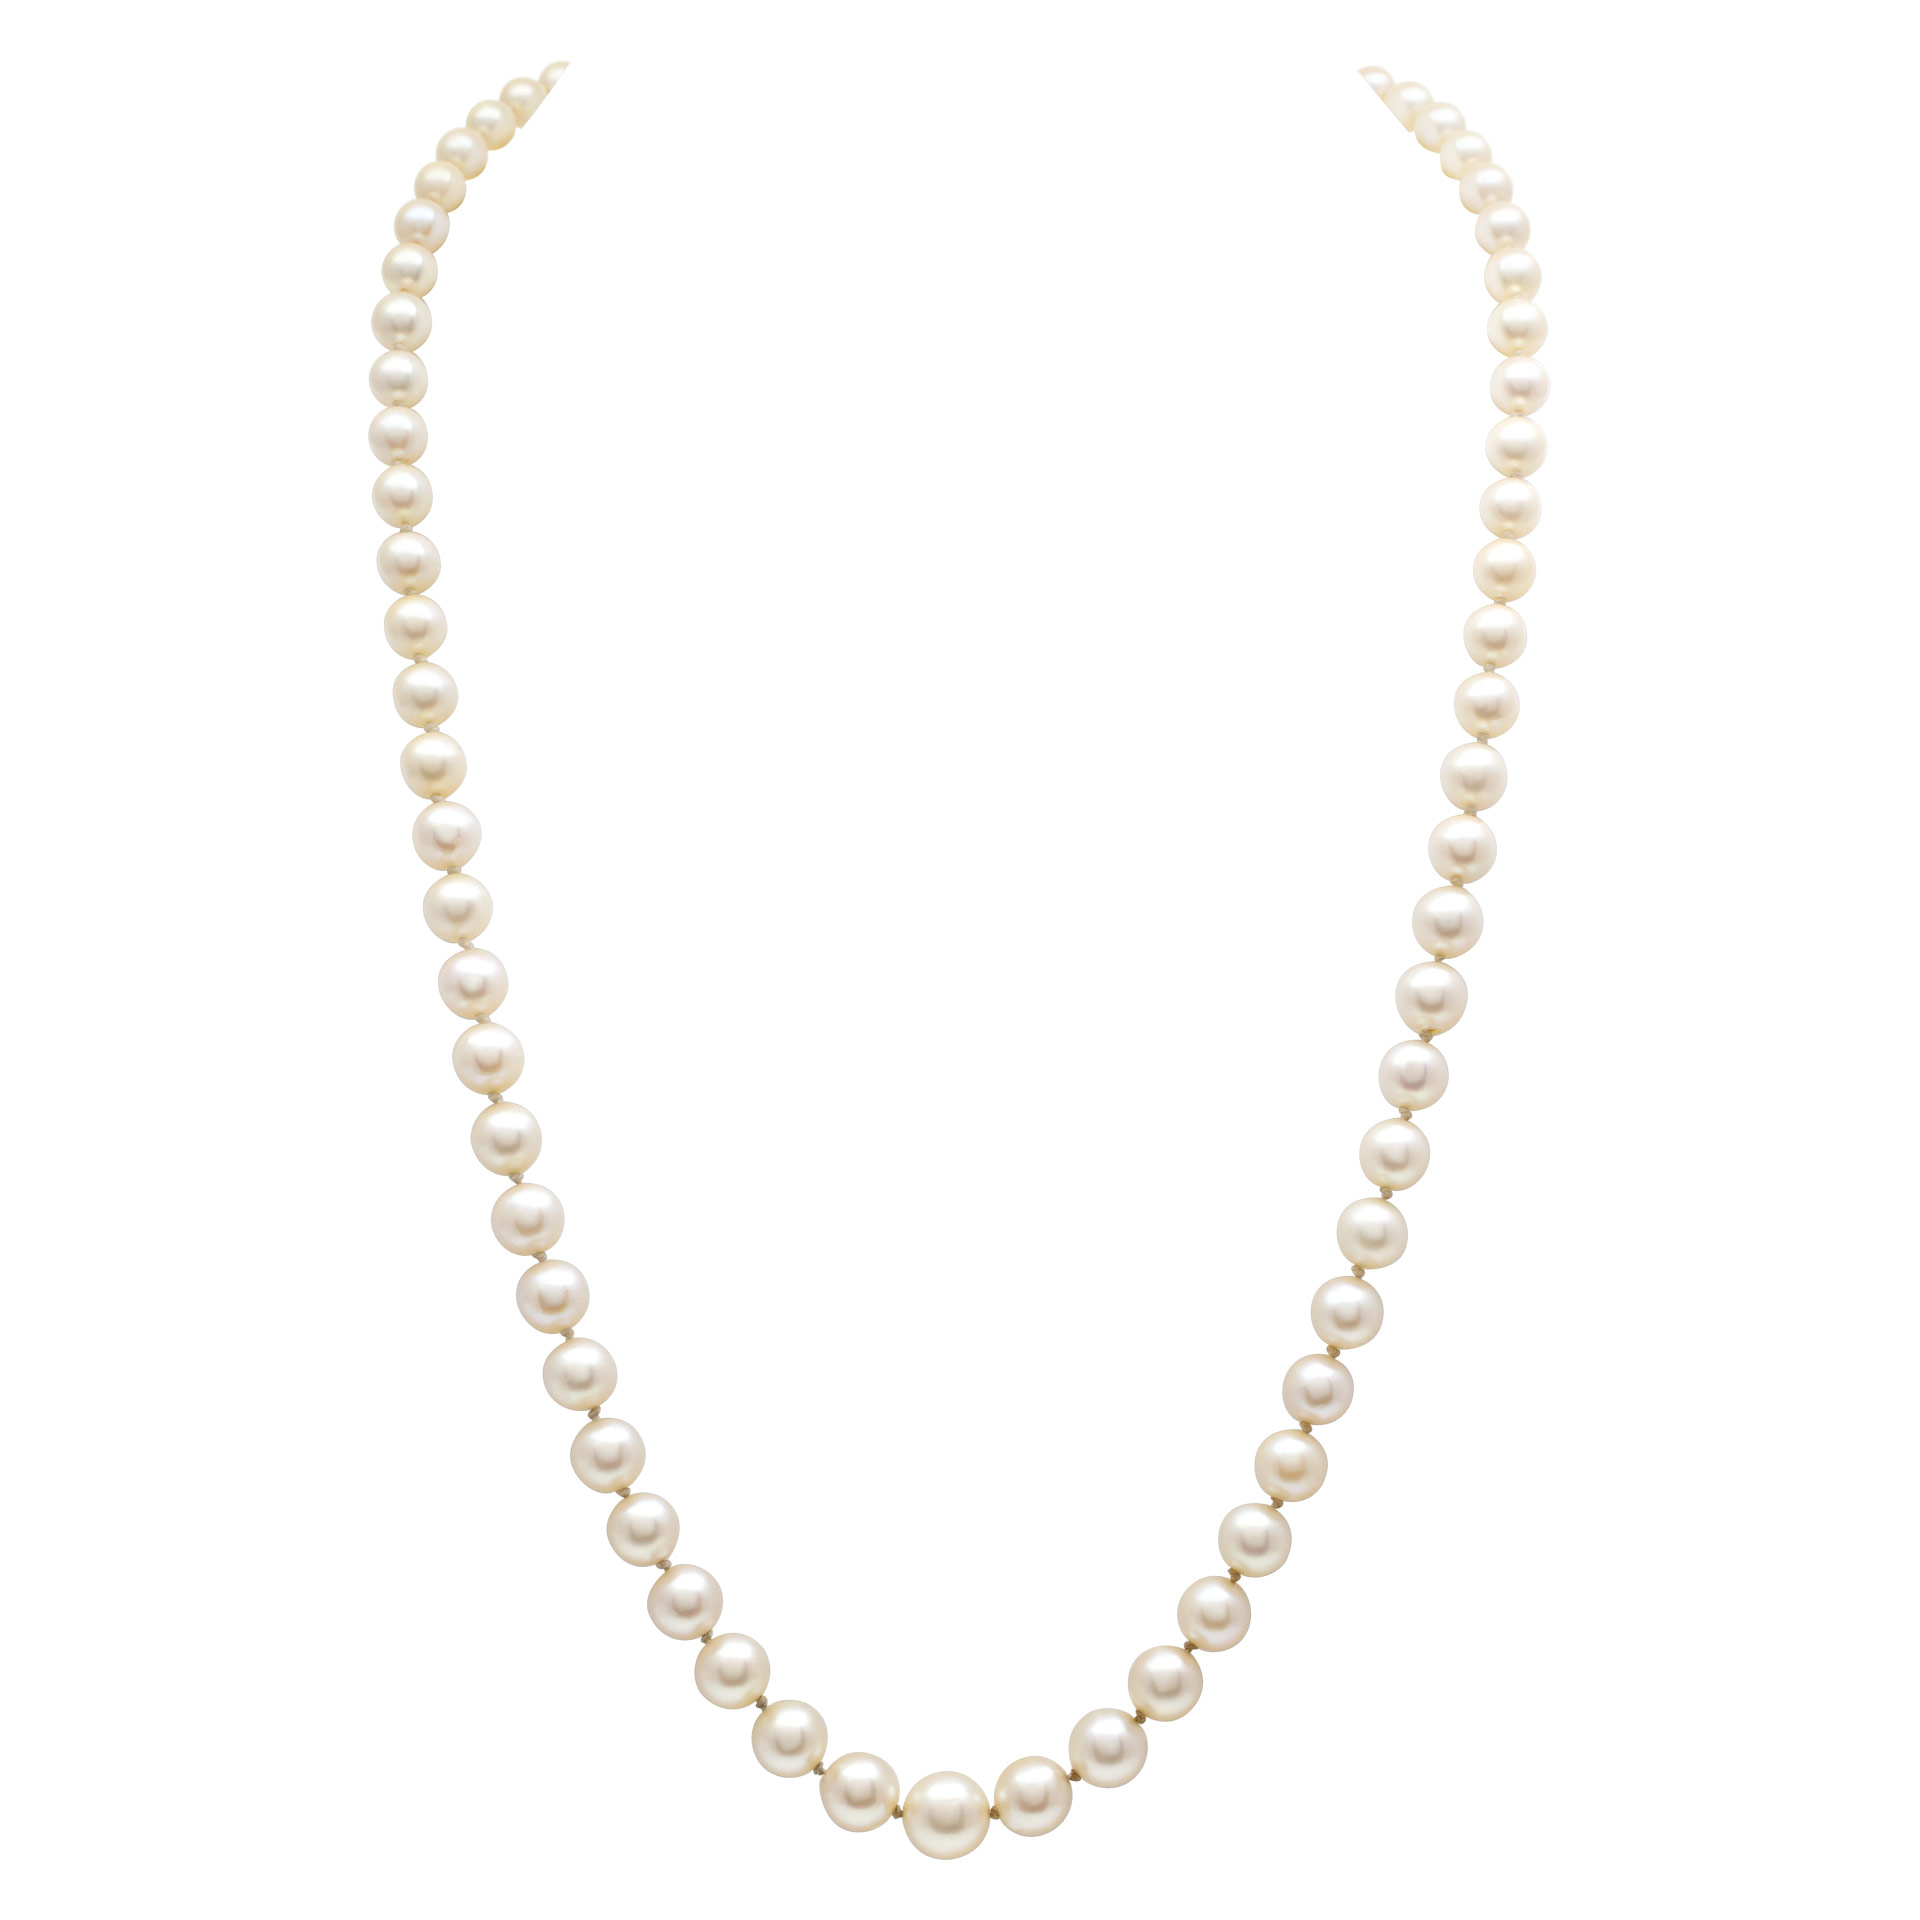 Graduated gold overtone with pink luster pearl necklace with 18k white gold clasp image 1